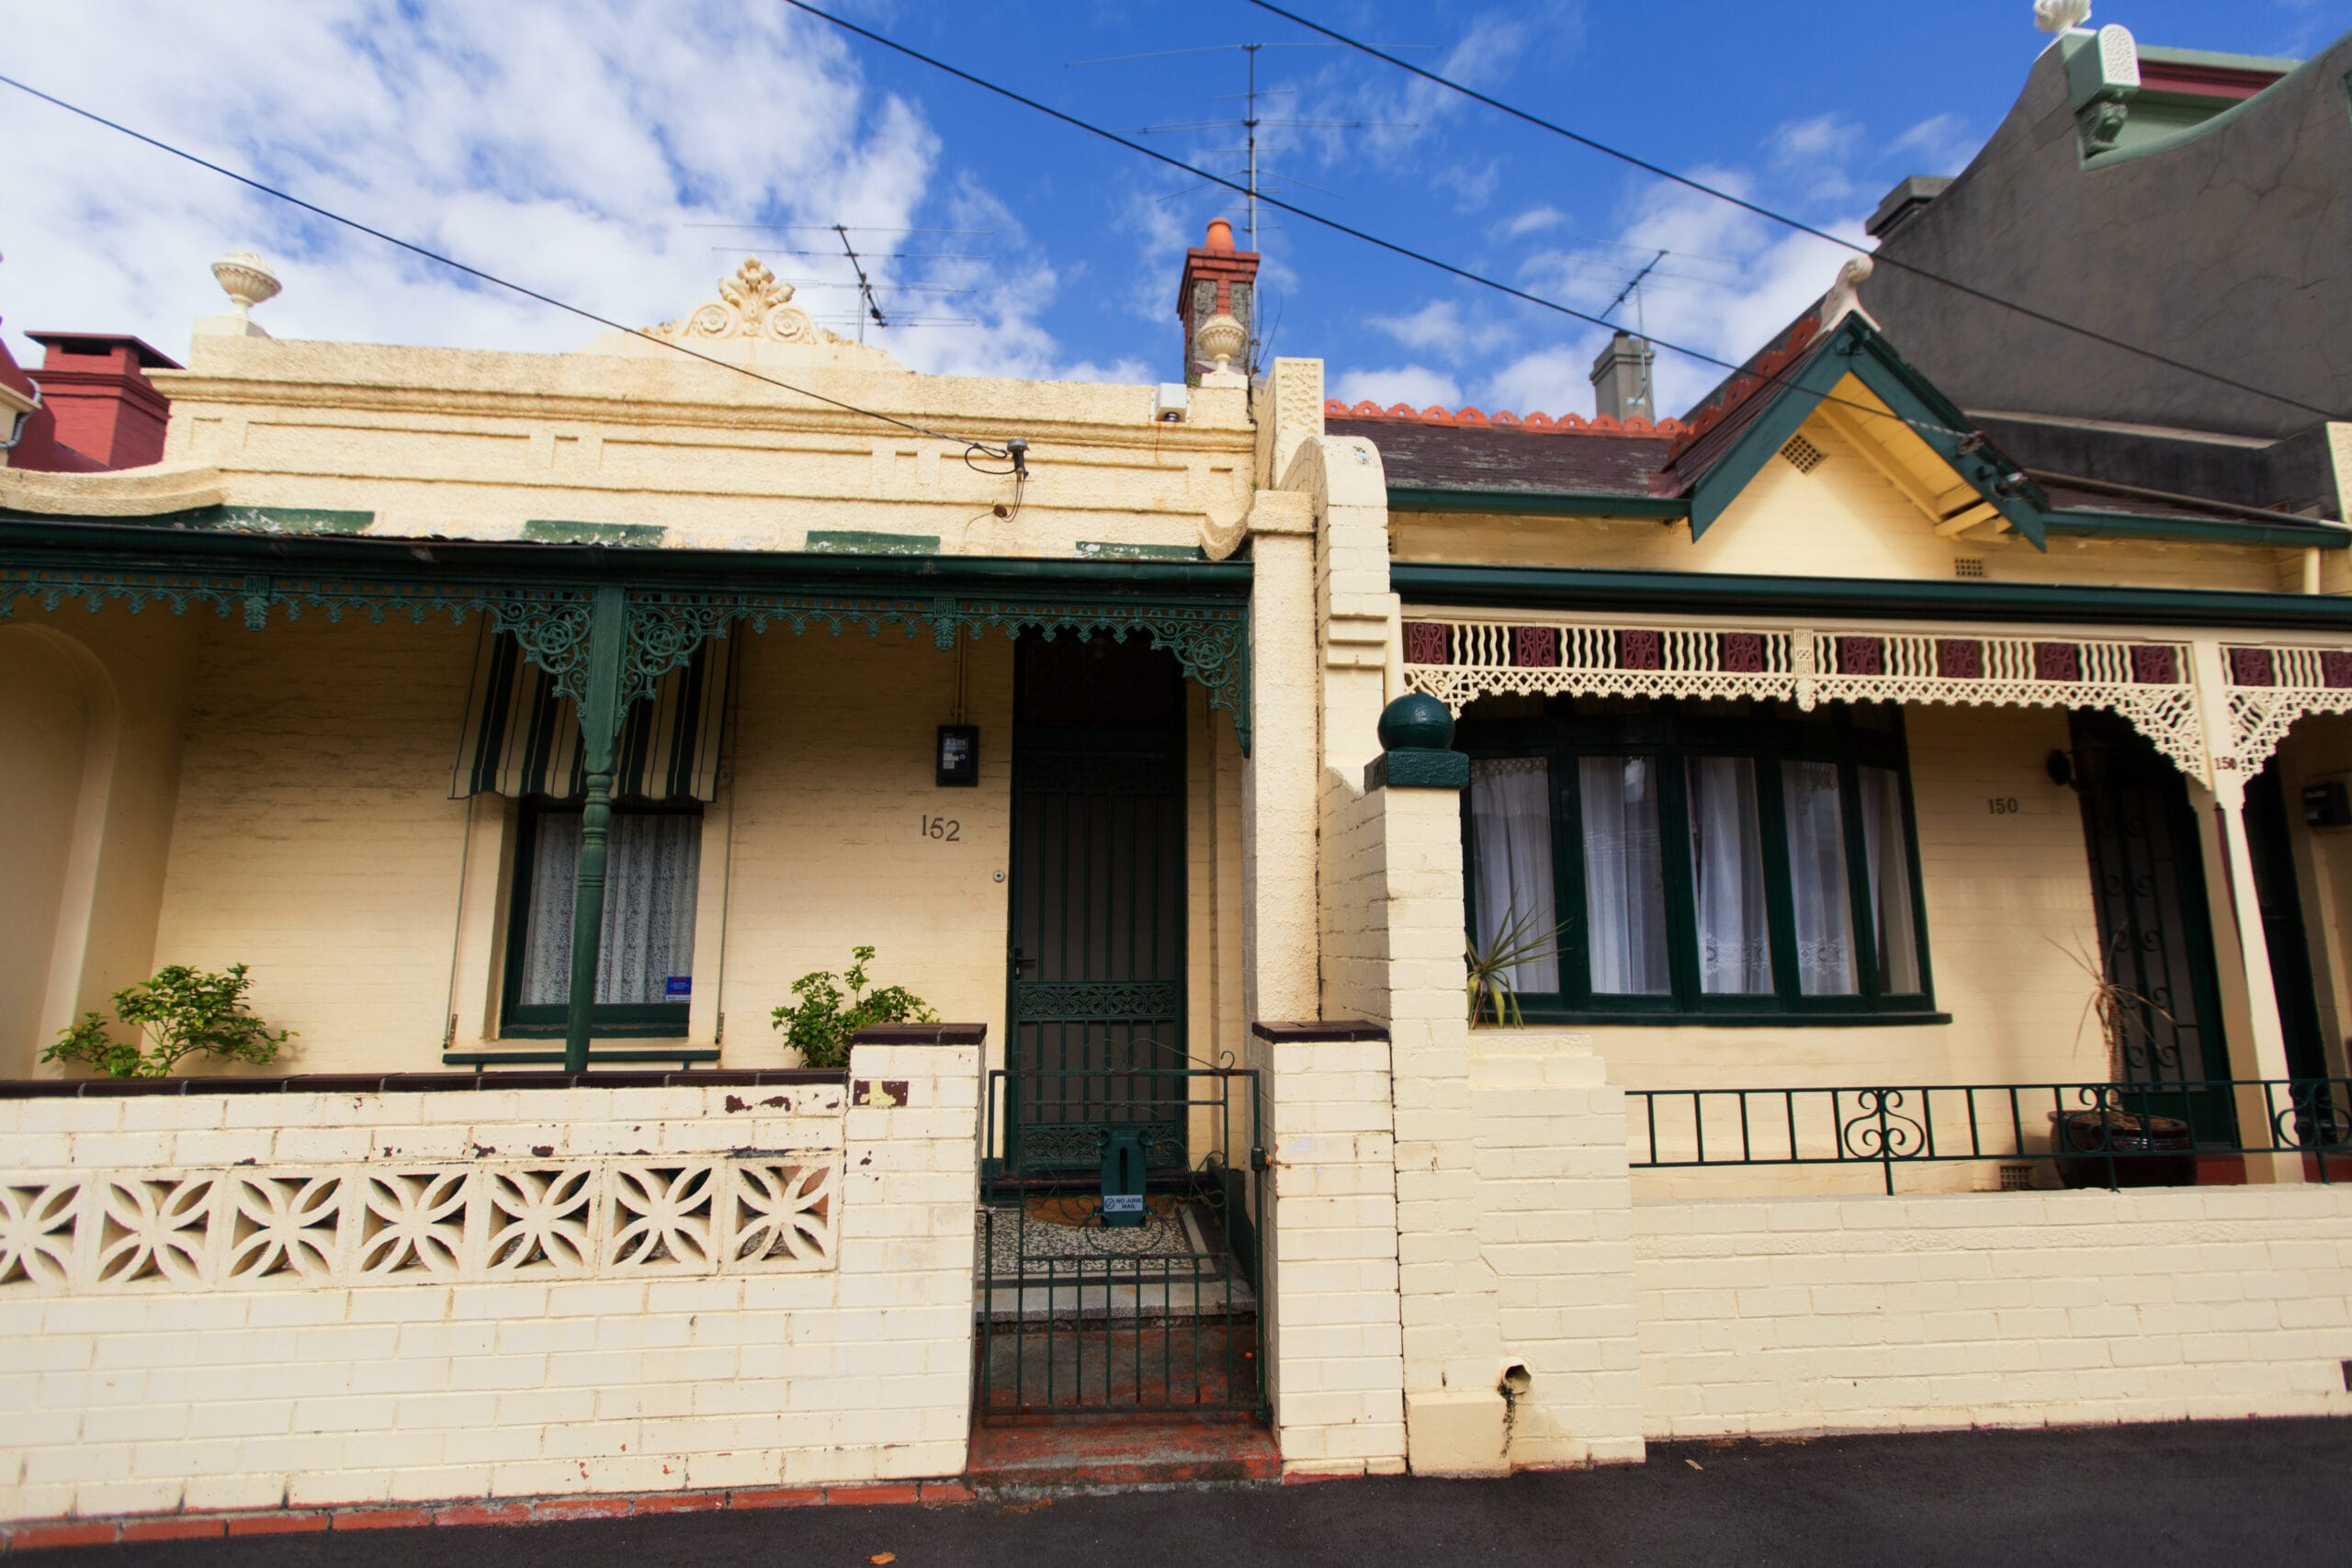 Melbourne,-,March,19,2015:,Victorian,House.